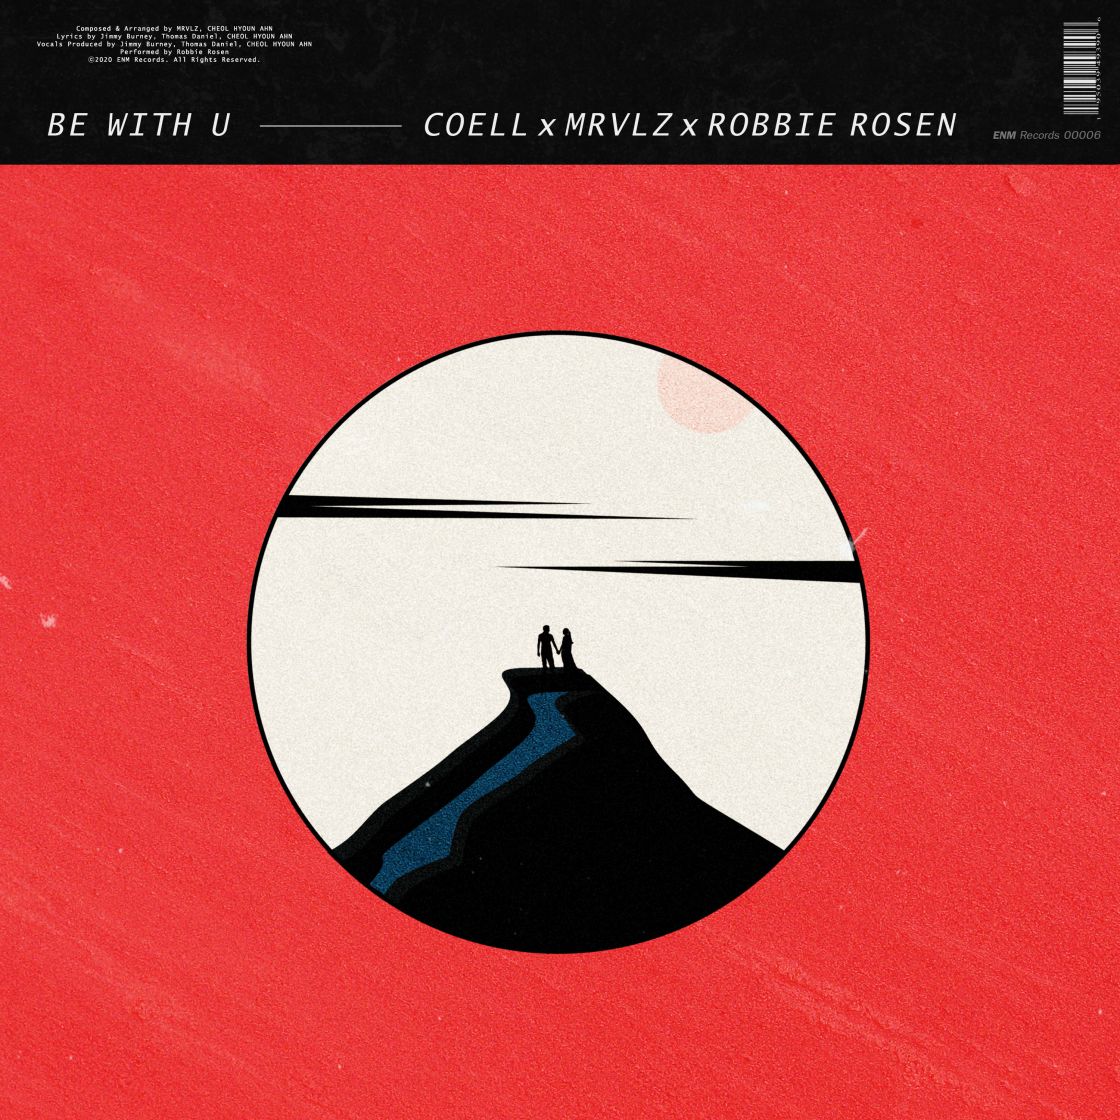 Be with U by COELL MRVLZ (Mabels) and Robbie Rosen is hot out the studiio